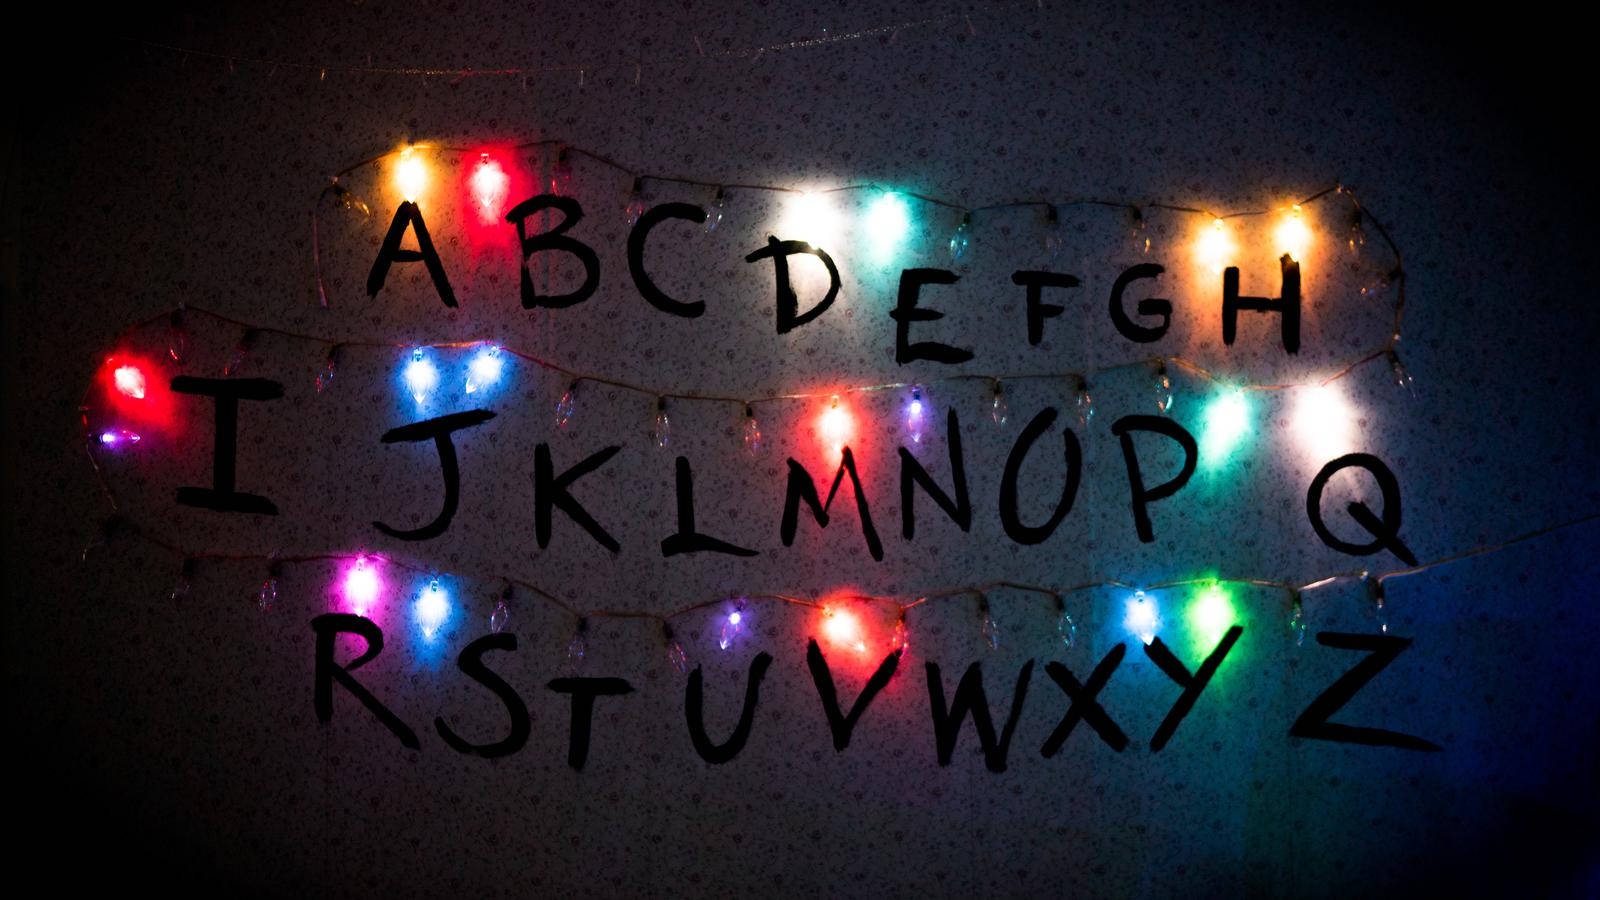 "Understand the Upside-Down with this Alphabet of Lights from Stranger Things" Wallpaper